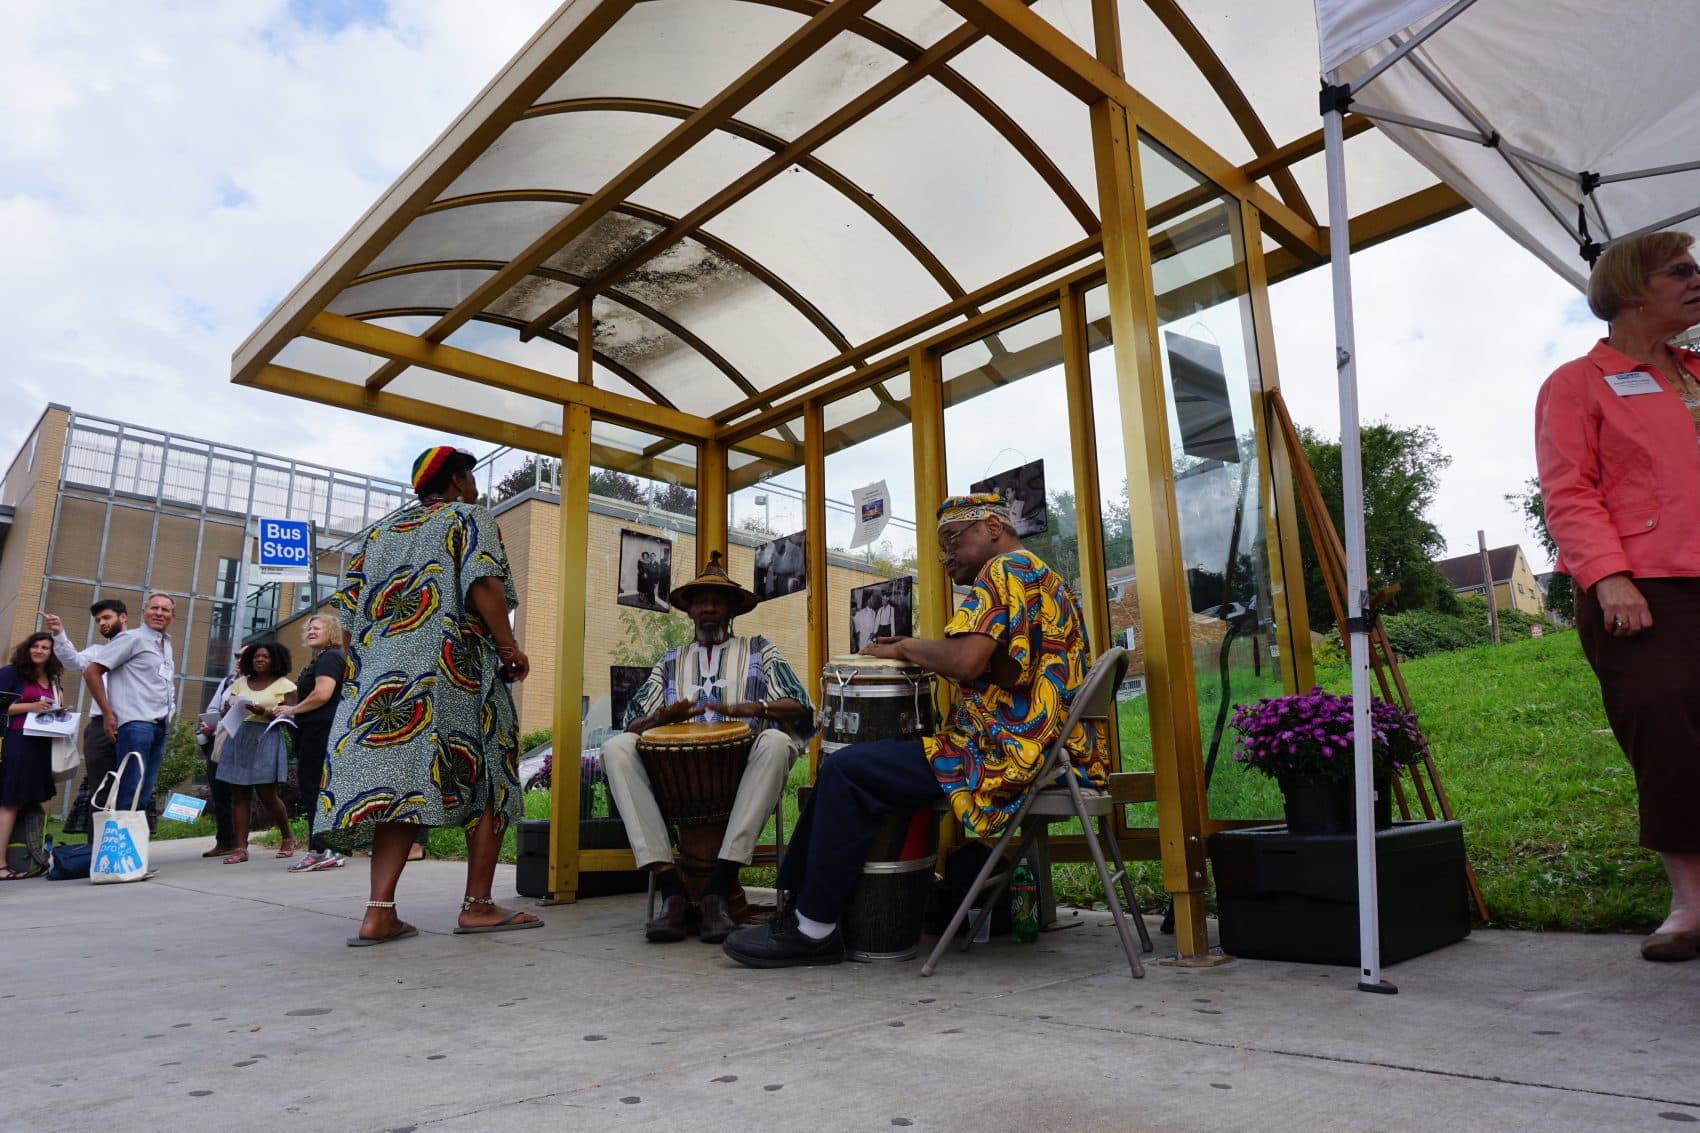 David Leyzerovsky and David Nelson's bus stop project in Pittsburgh. (Courtesy Project for Public Spaces)